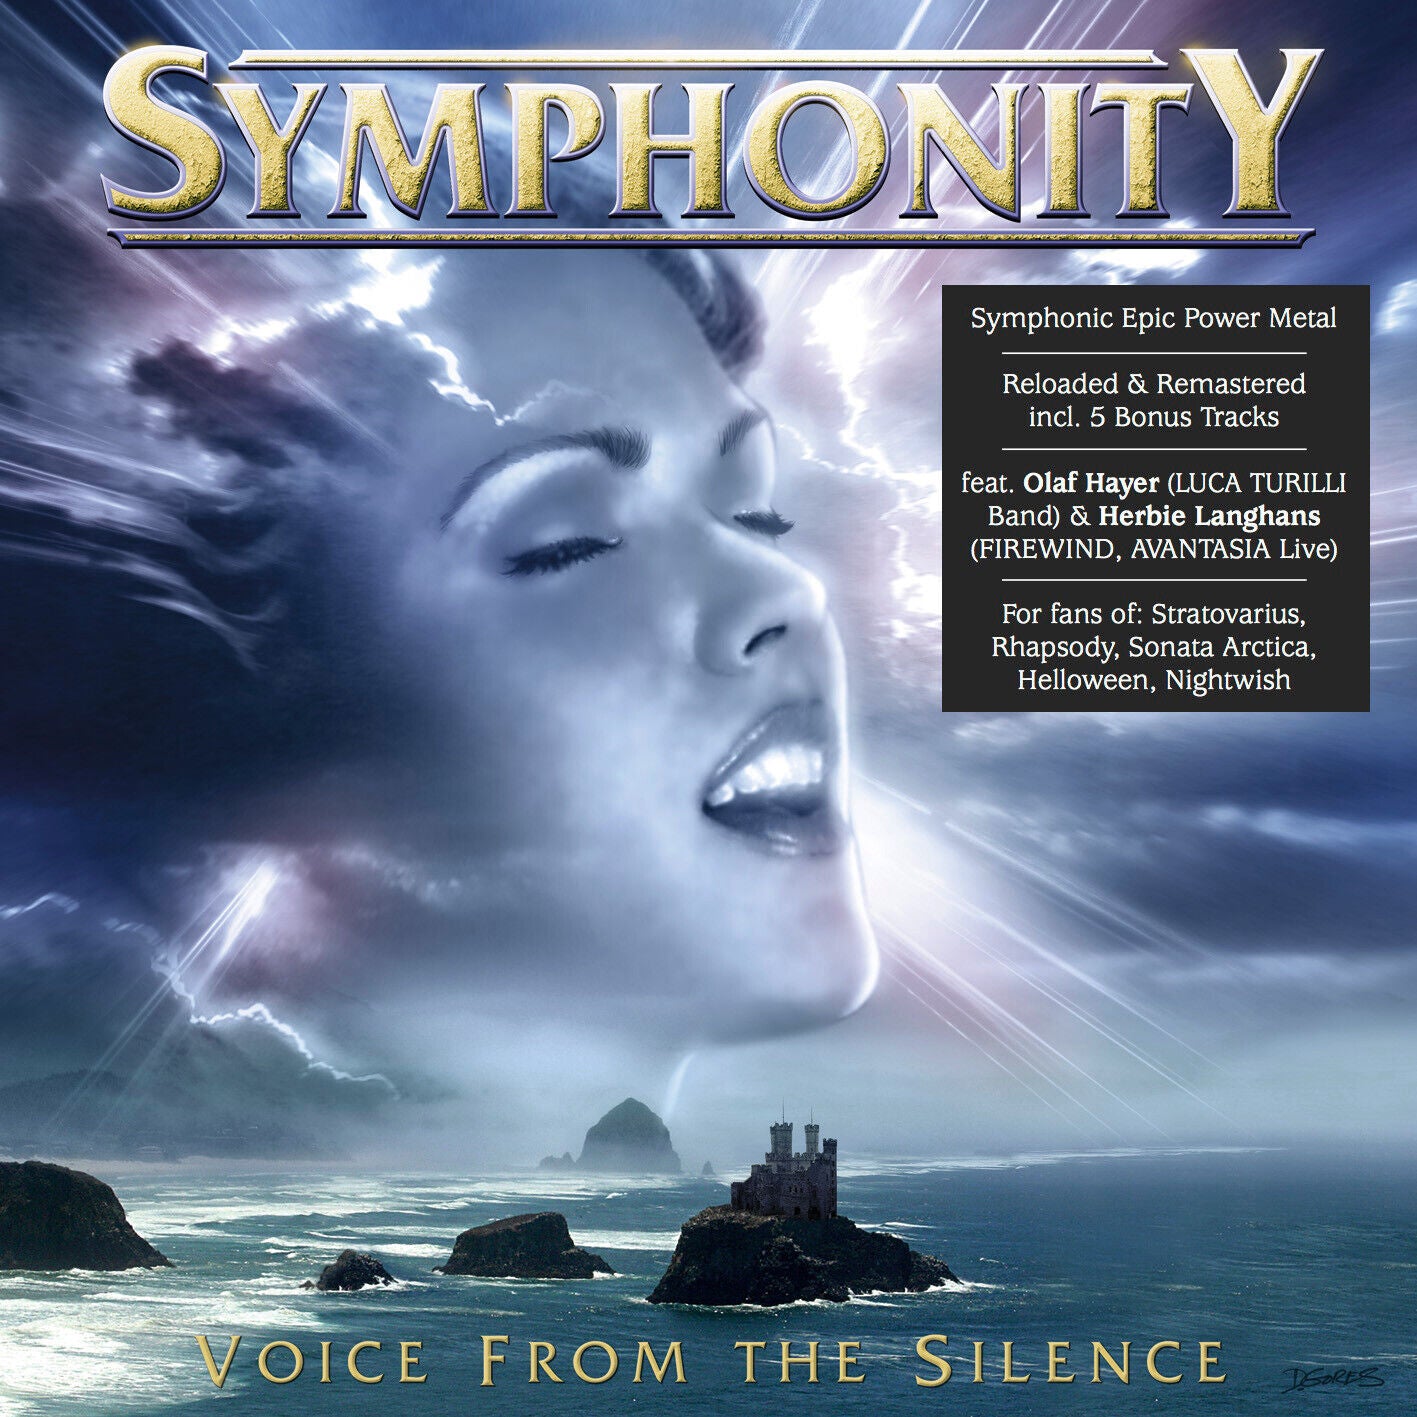 Symphonity - Voice From The Silence CD 2022 Reissue + Bonus Tracks + Remastered